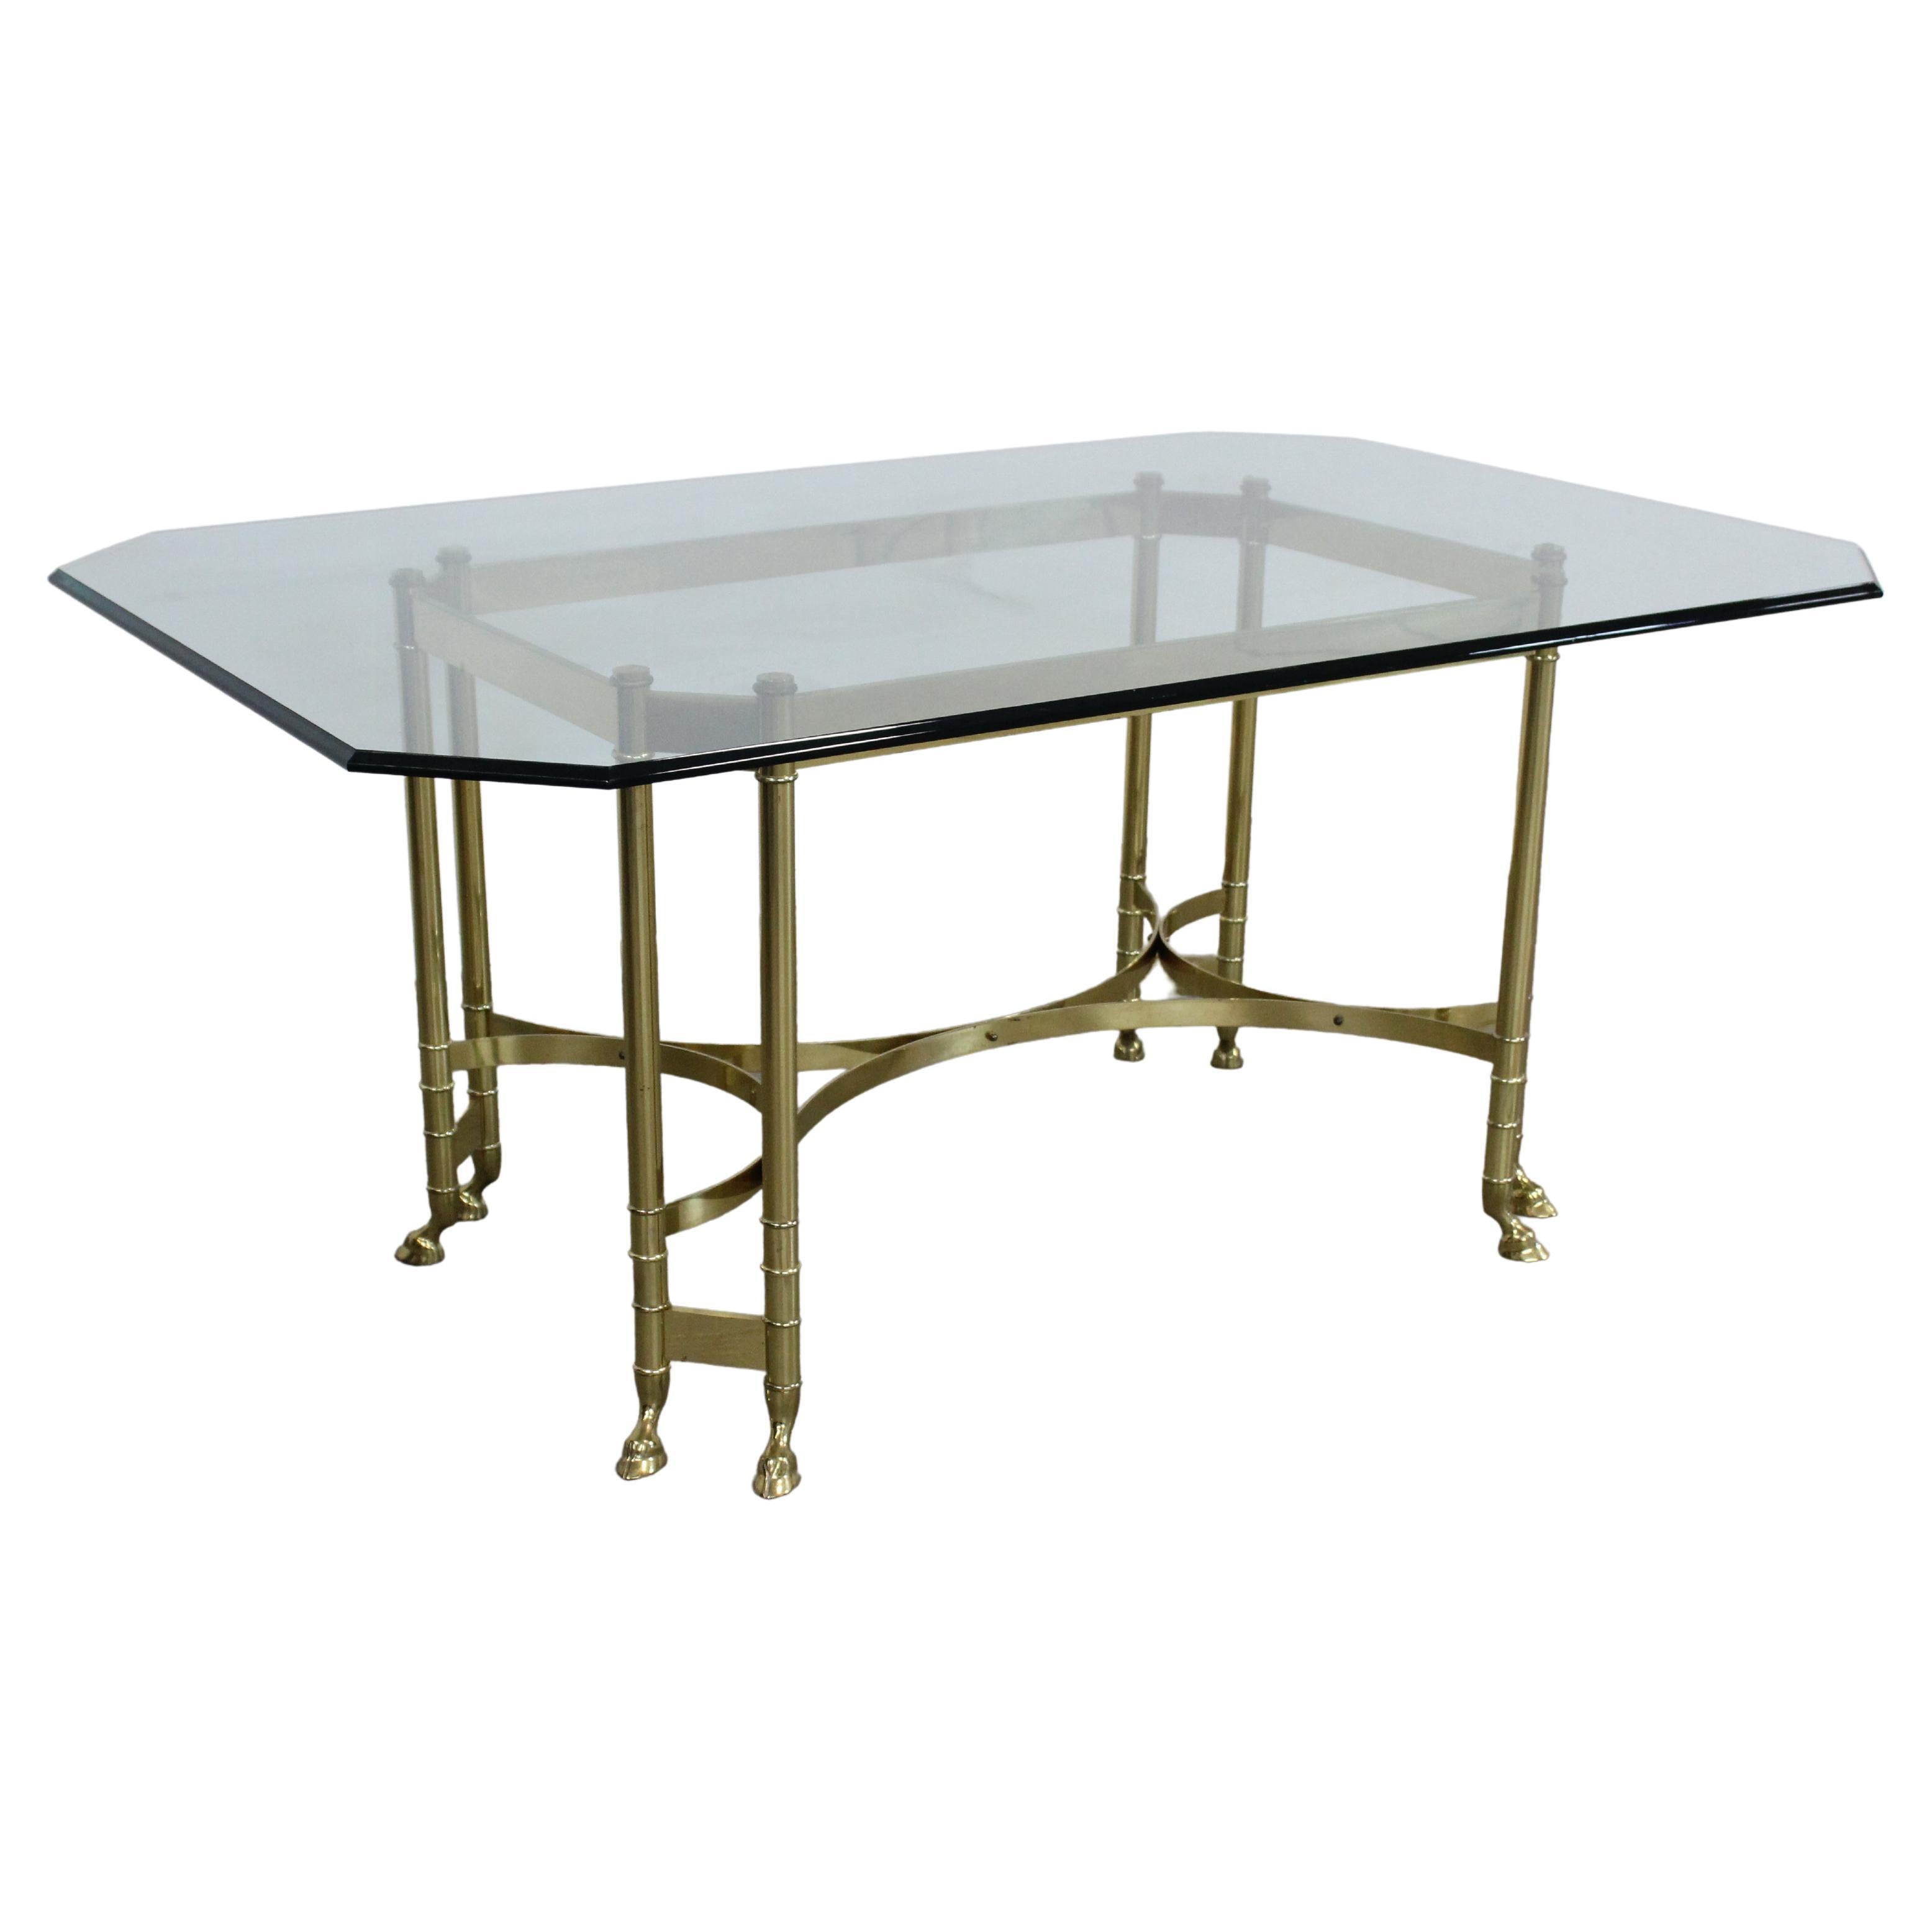 Vintage Brass and Glass Jansen Regency Style Hoof Foot Dining Table For Sale